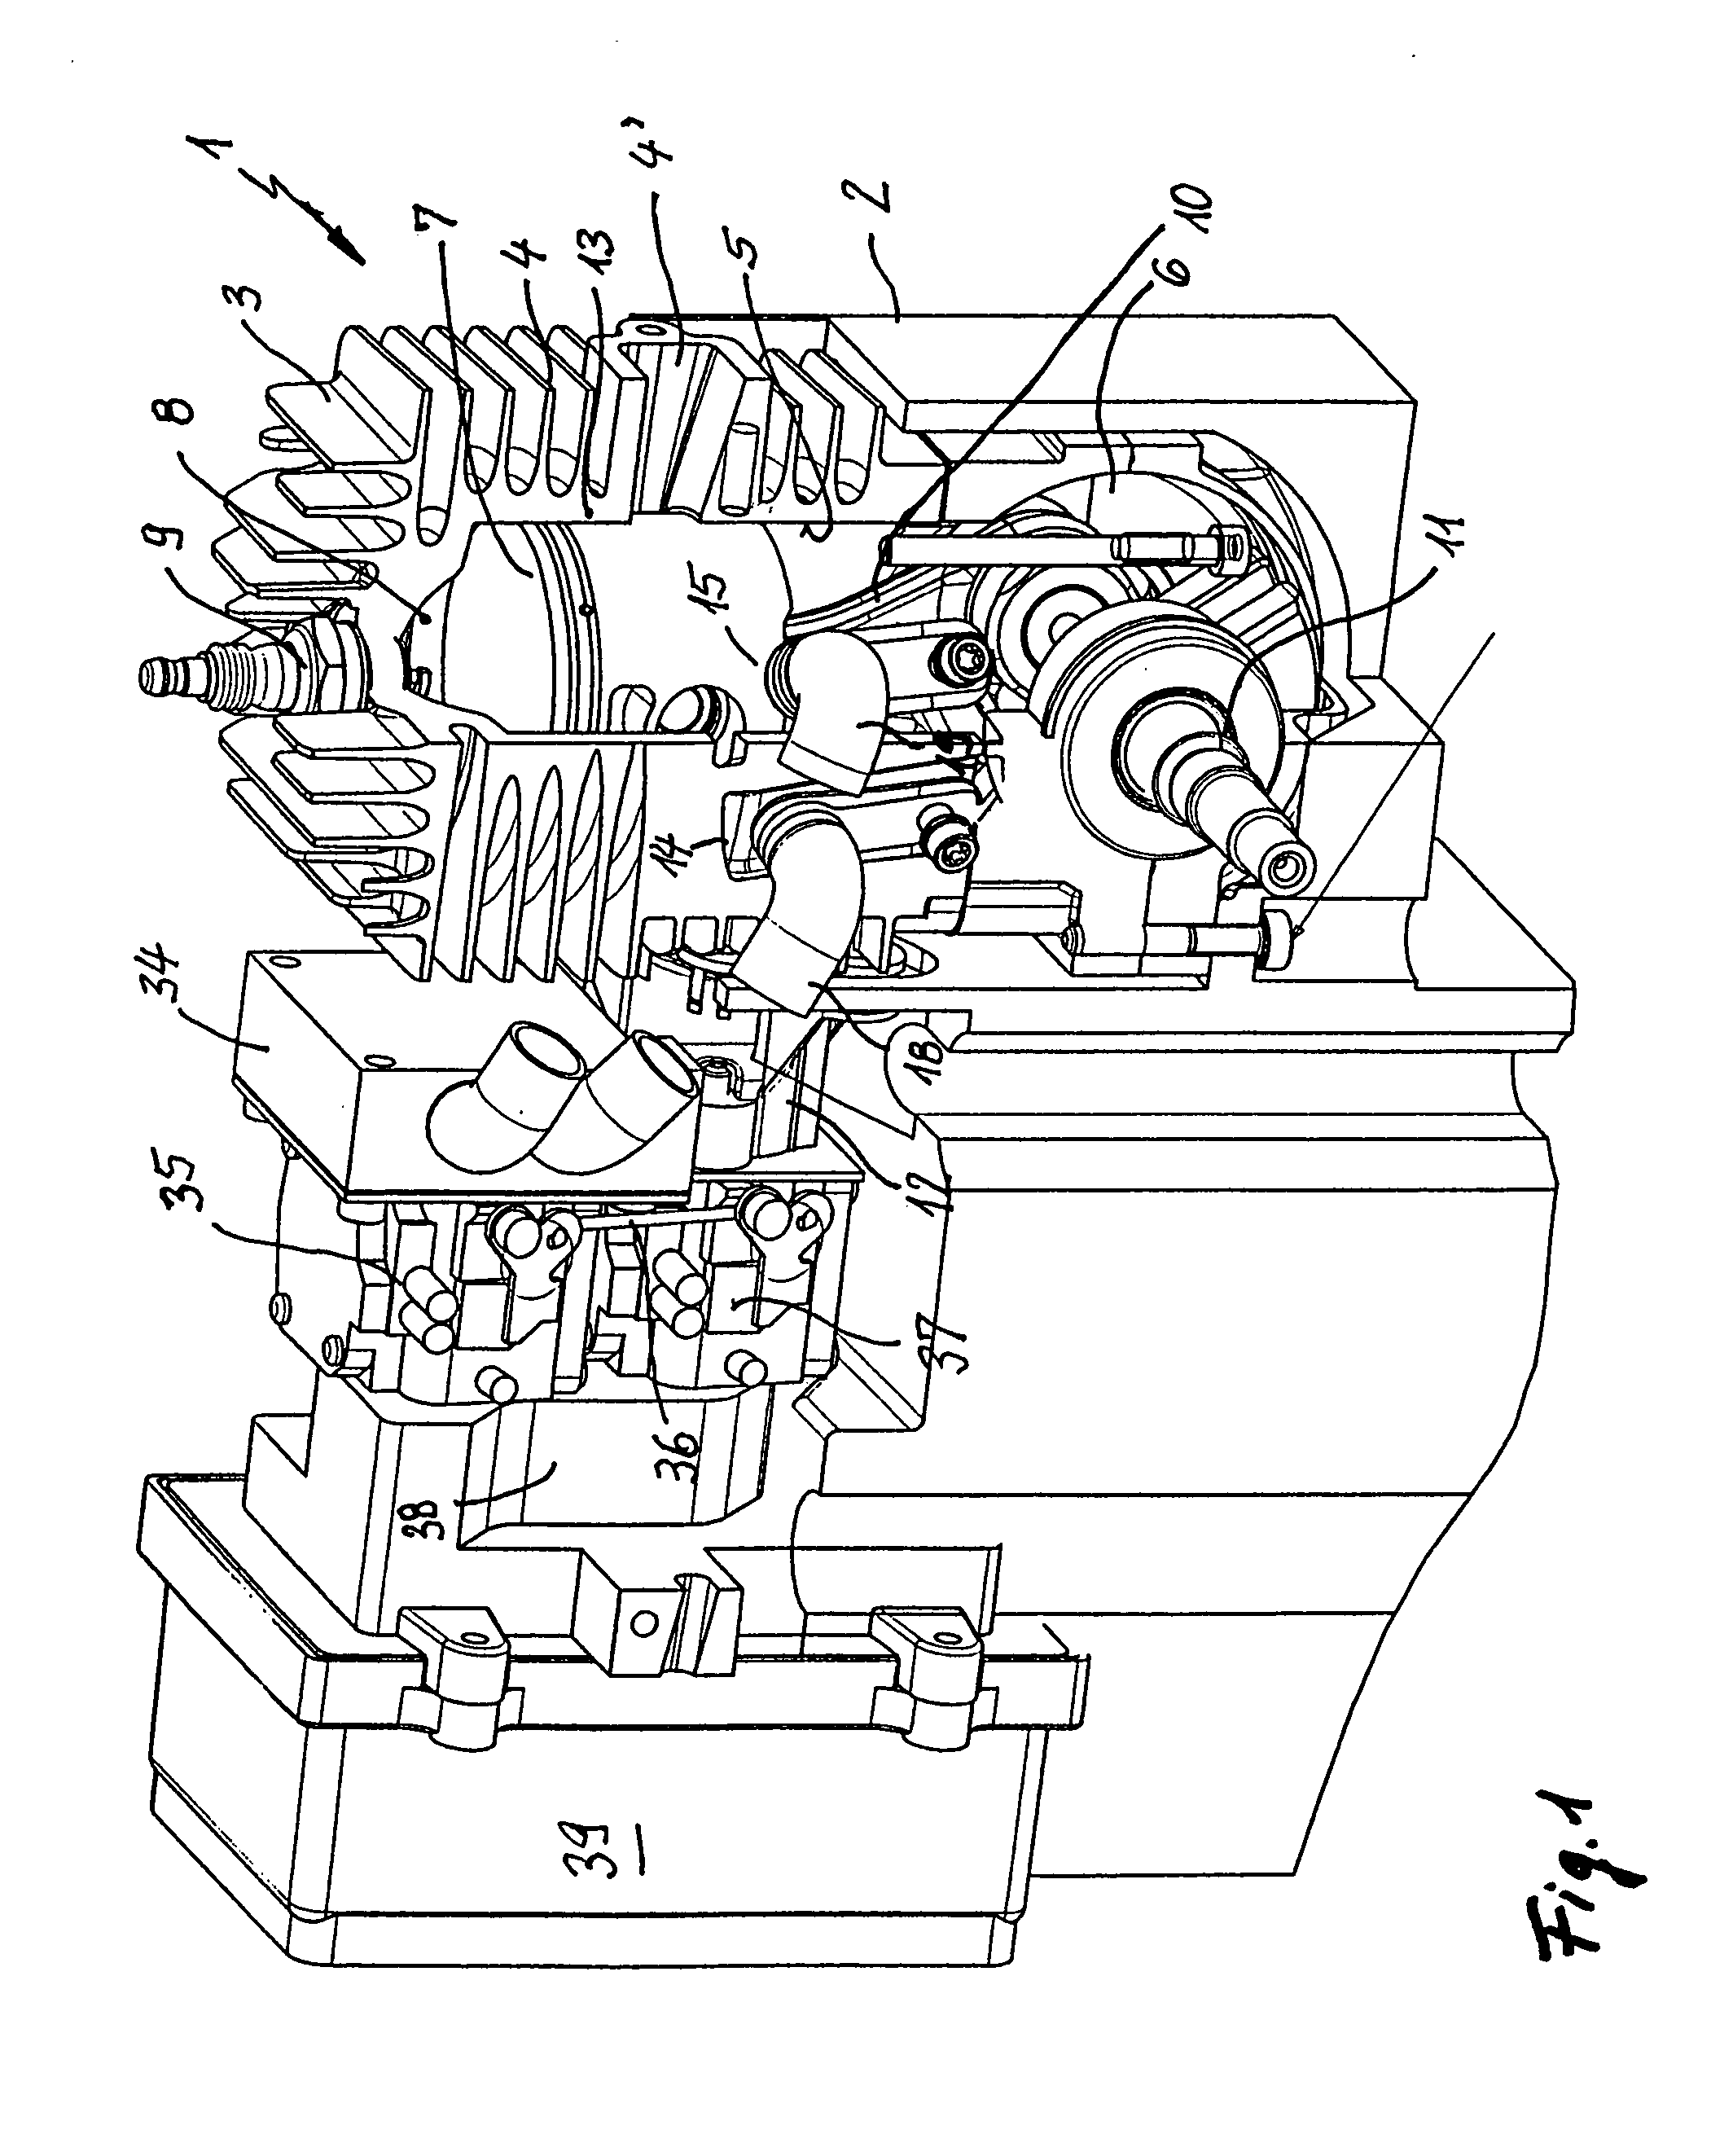 Two-stroke engine having a membrane valve integrated into the transfer channel